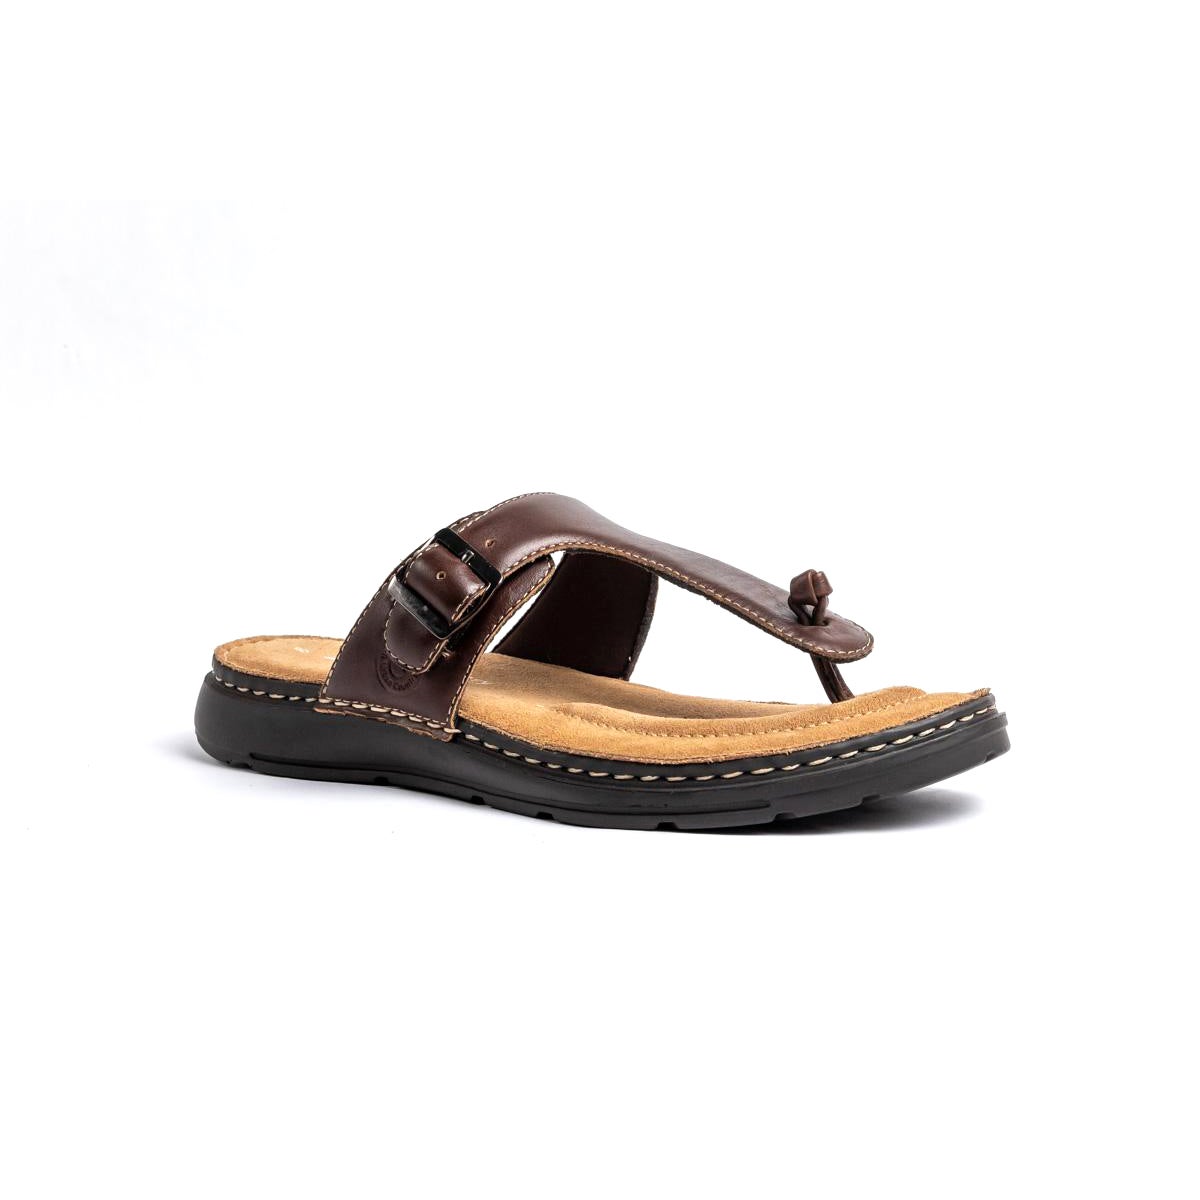 Buy Pack of 2 Designer Sandals + Free Stylish Sunglasses (LSW7) Online at  Best Price in India on Naaptol.com